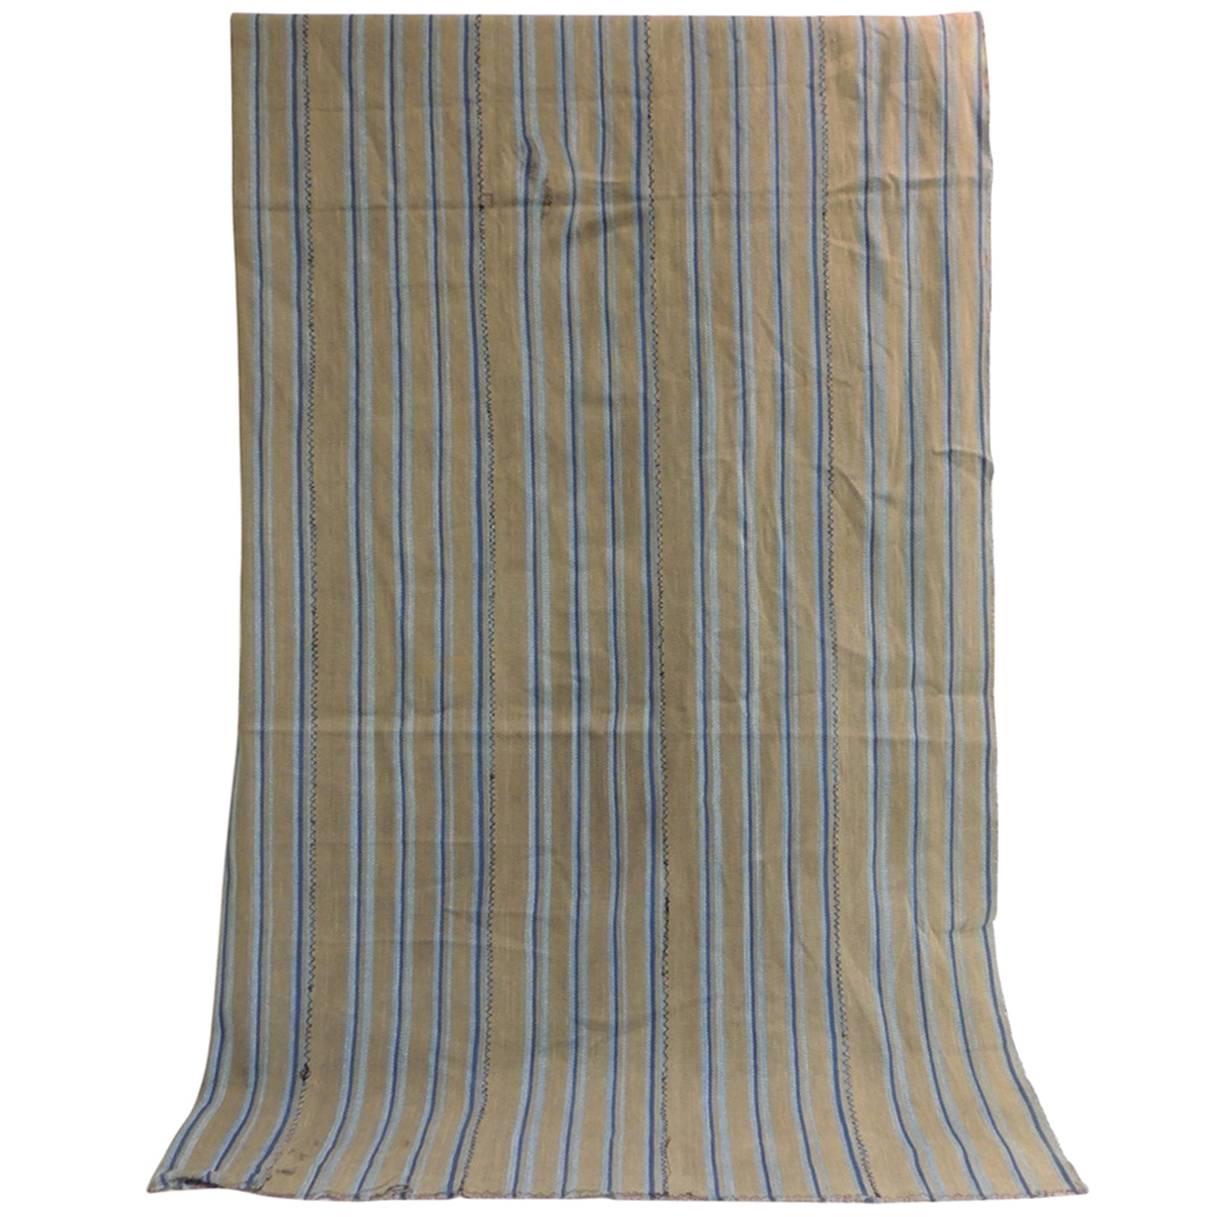 Vintage Yoruba and Baulé warp Ikat artisanal cloth. West Africa vintage Yoruba and Baulé warp ikat. In shades of tan dark and light blue.
Ikat is the process whereby threads are tie-dyed before weaving takes place. When the cloth is woven, any